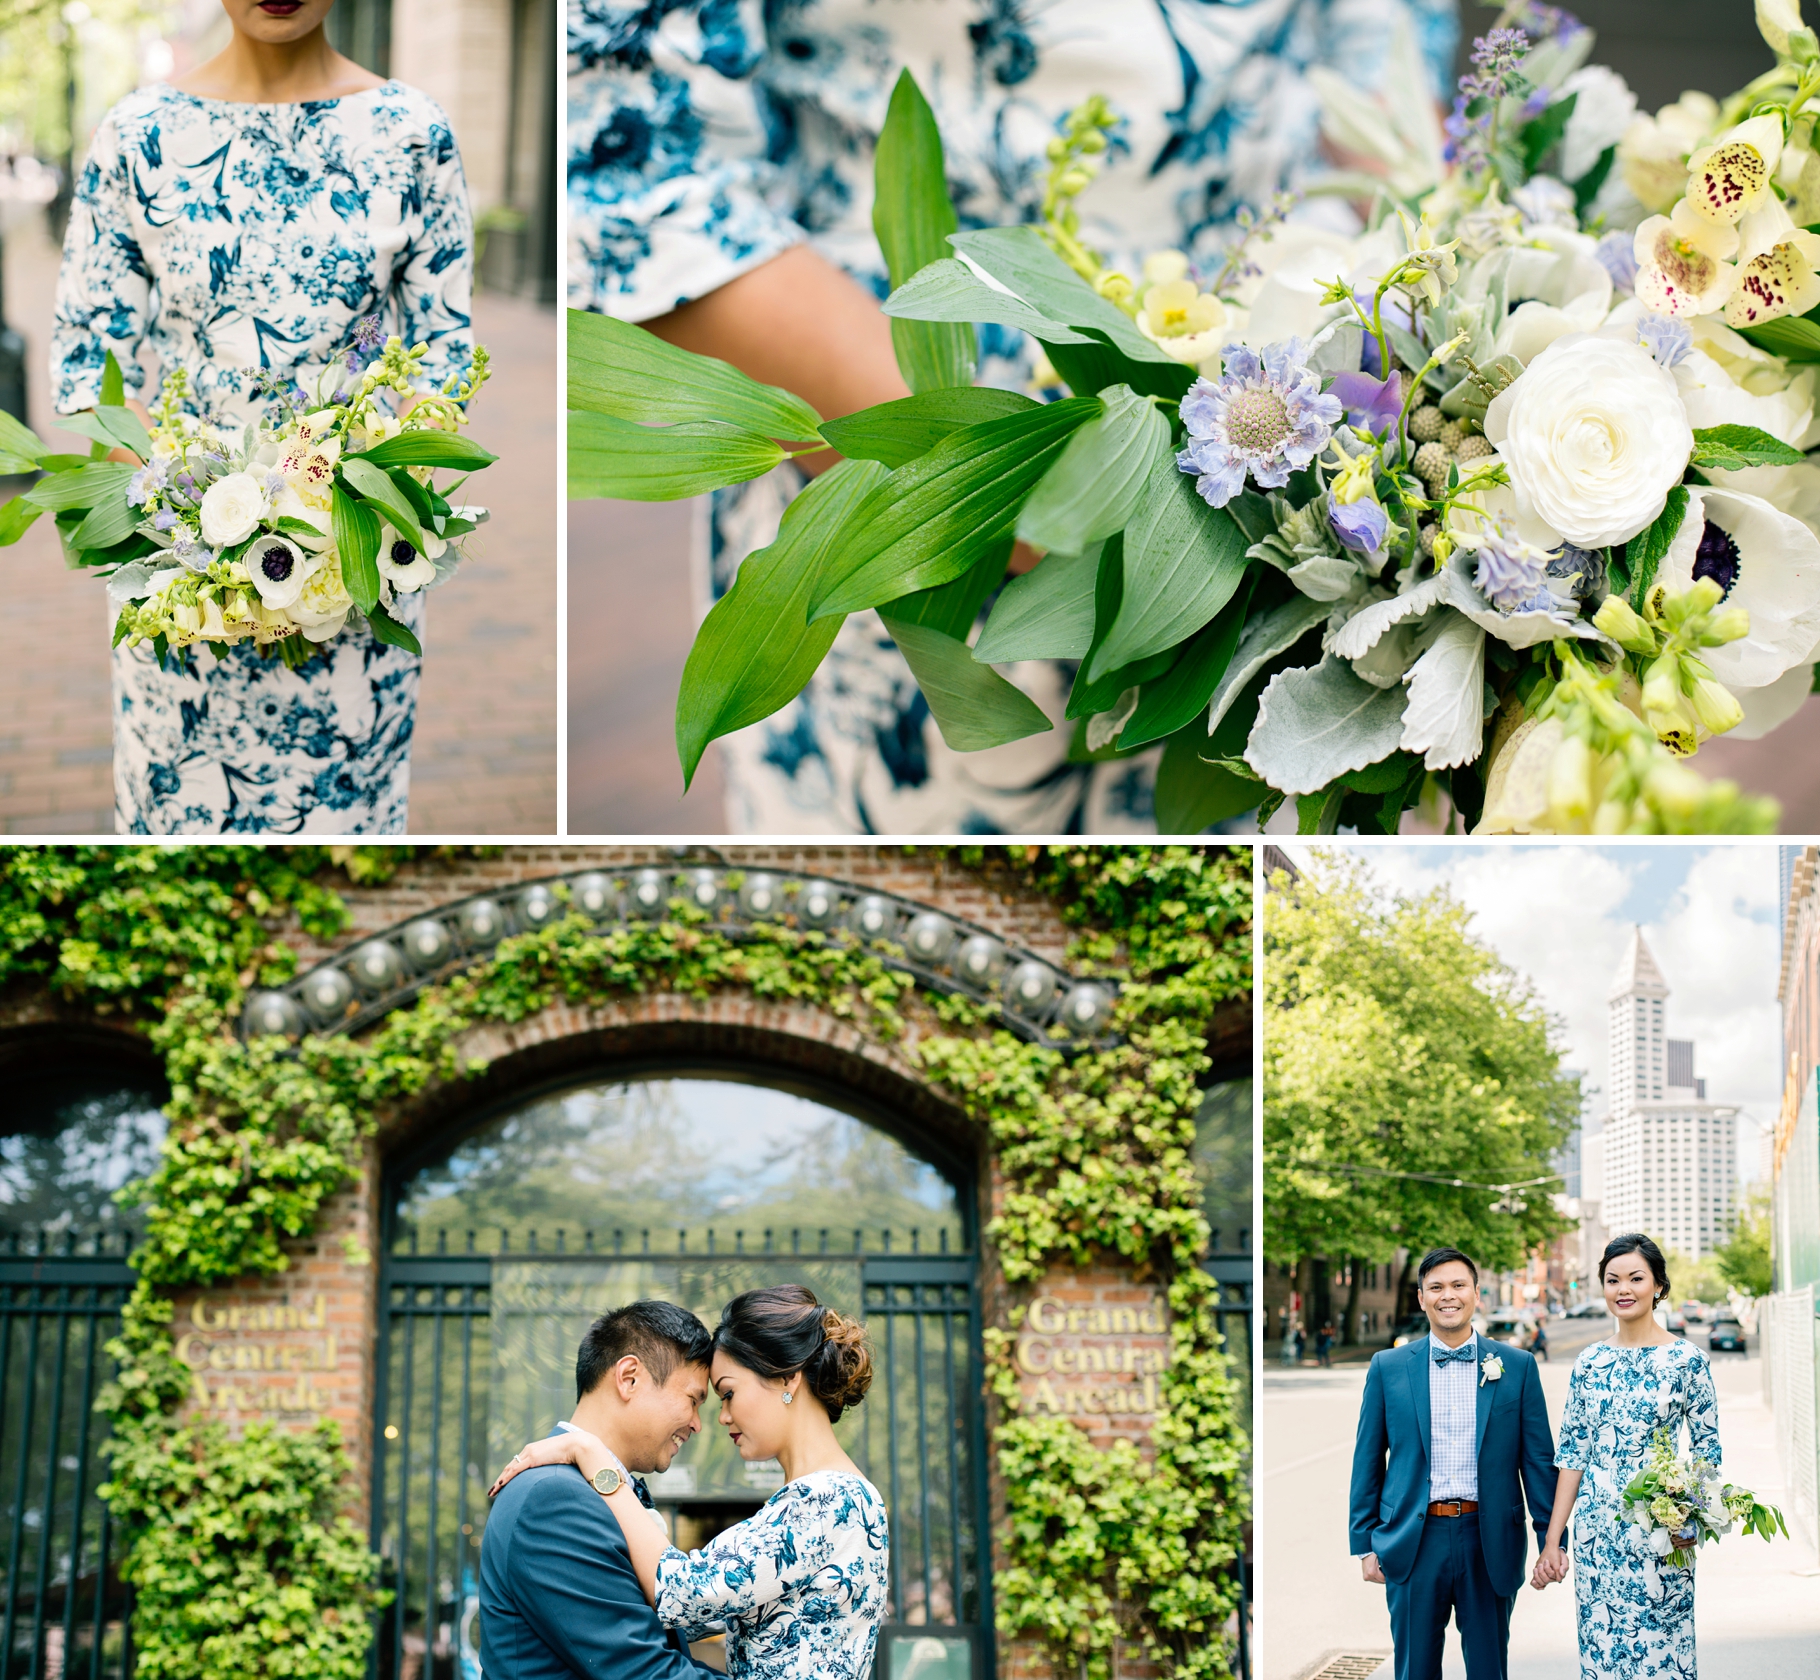 8-Bride-Groom-Romantic-Editorial-Portraits-Wedding-Bouquet-White-Blue-Florals-Occidental-Park-Pioneer-Square-Ivy-Brick-Seattle-Smith-Tower-Wedding-Day-Photographer-Photography-by-Betty-Elaine